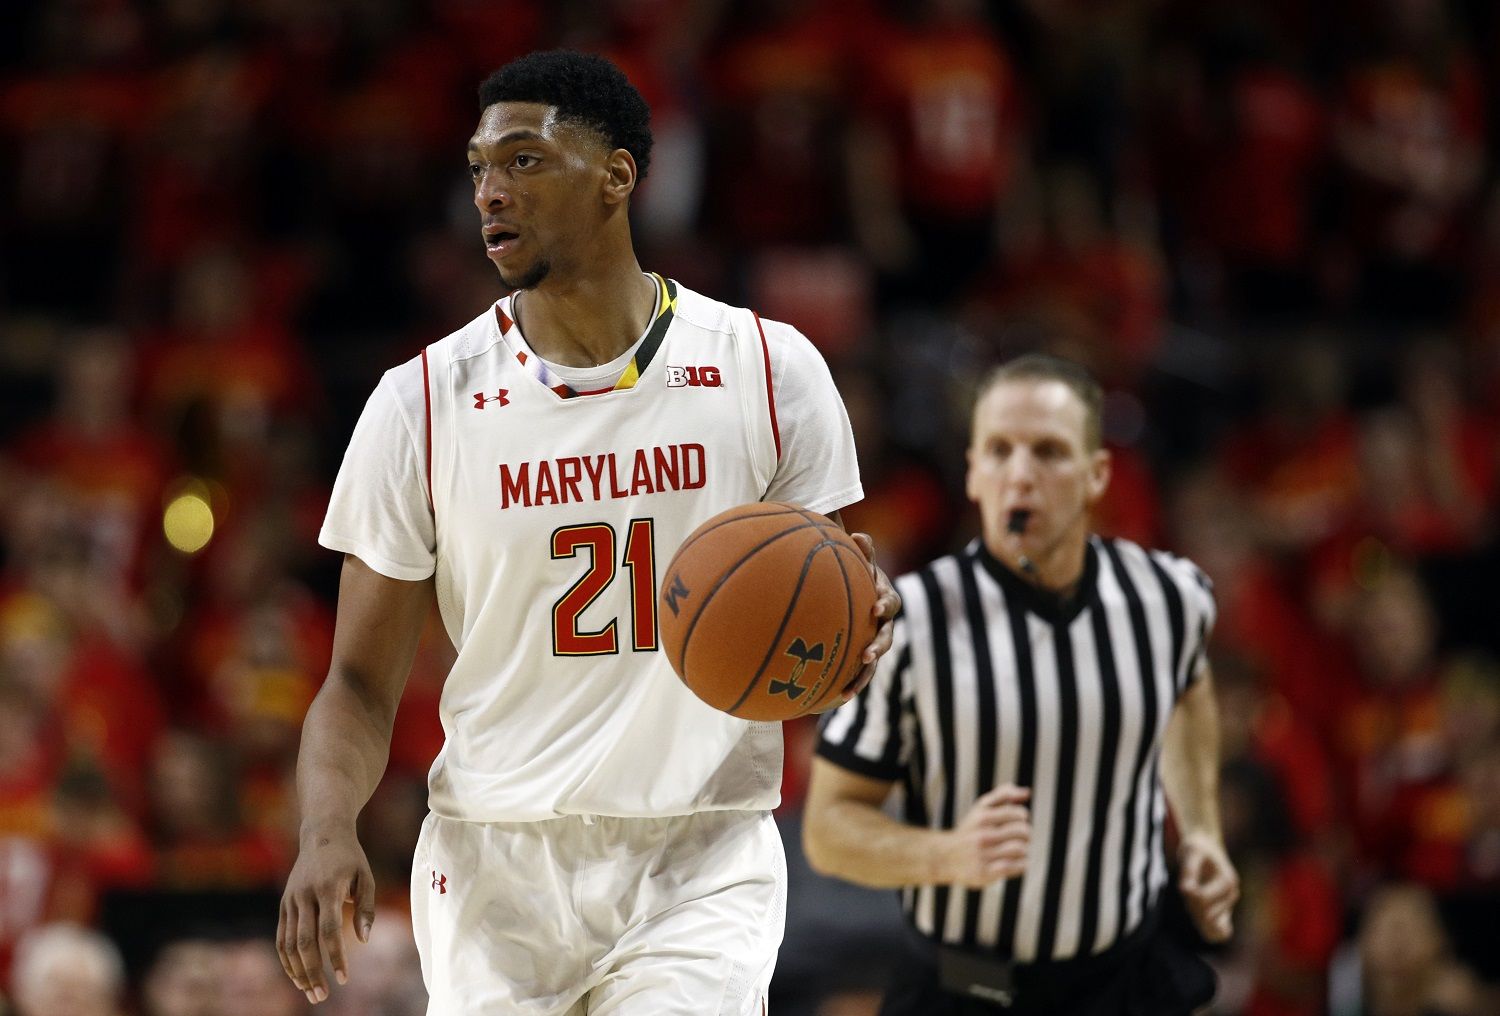 Maryland forward Justin Jackson drives the ball in the second half of an NCAA college basketball game against Purdue in College Park, Md., Friday, Dec. 1, 2017. (AP Photo/Patrick Semansky)